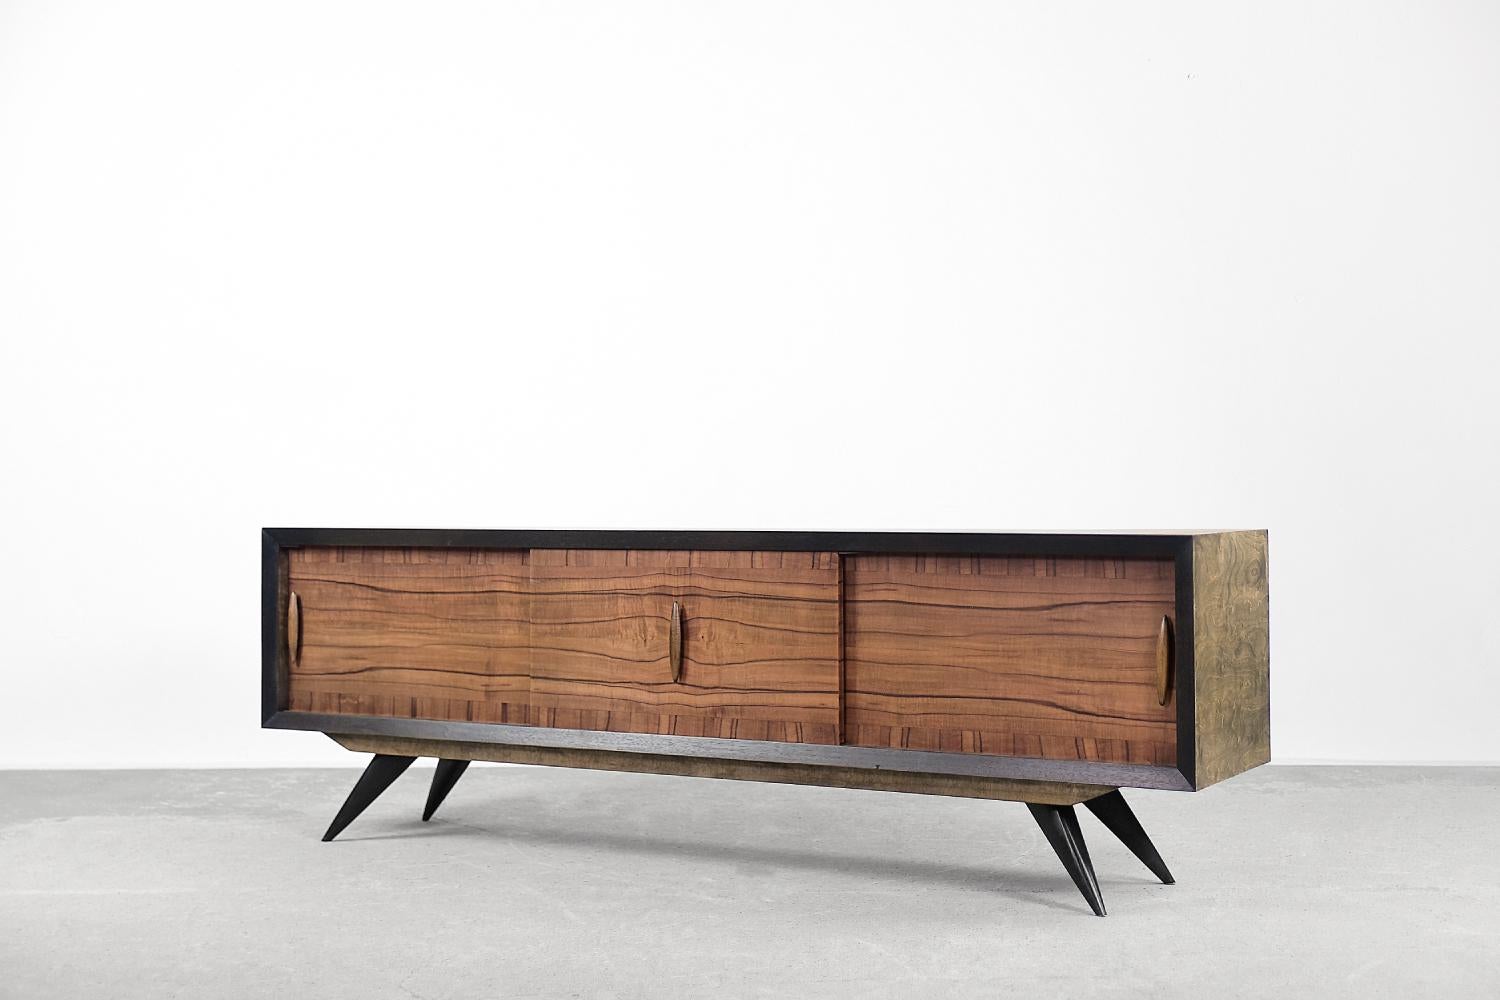 This modernist sideboard comes from Scandinavia, where it was created during the 1960s. The top and sides are finished with birch wood with a strong, irregular grain. The front is made of walnut wood in natural tone. The sideboard has three sliding